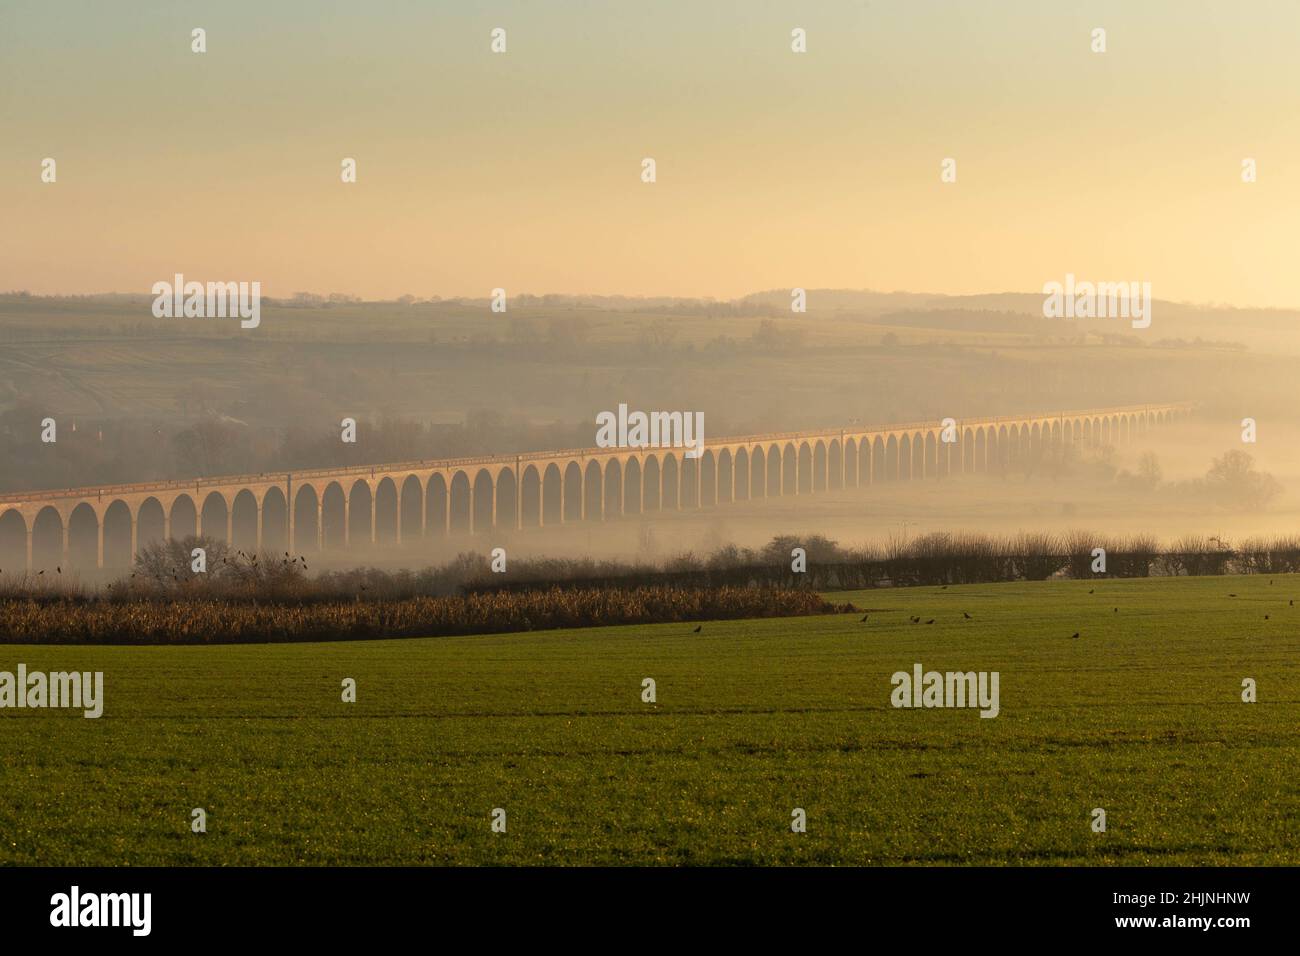 14.1.2022 Fog engulfs the Harringworth Viaduct the viaduct crosses the valley of the River Welland between Harringworth in Northamptonshire and Seaton in Rutland, England. The viaduct is 1,275 yards long and has 82 arches, each with a 40 feet span. It is the longest masonry viaduct across a valley in the United Kingdom.  ©Tim Scrivener Photographer 07850 303986      ....Covering Agriculture In The UK.... Stock Photo